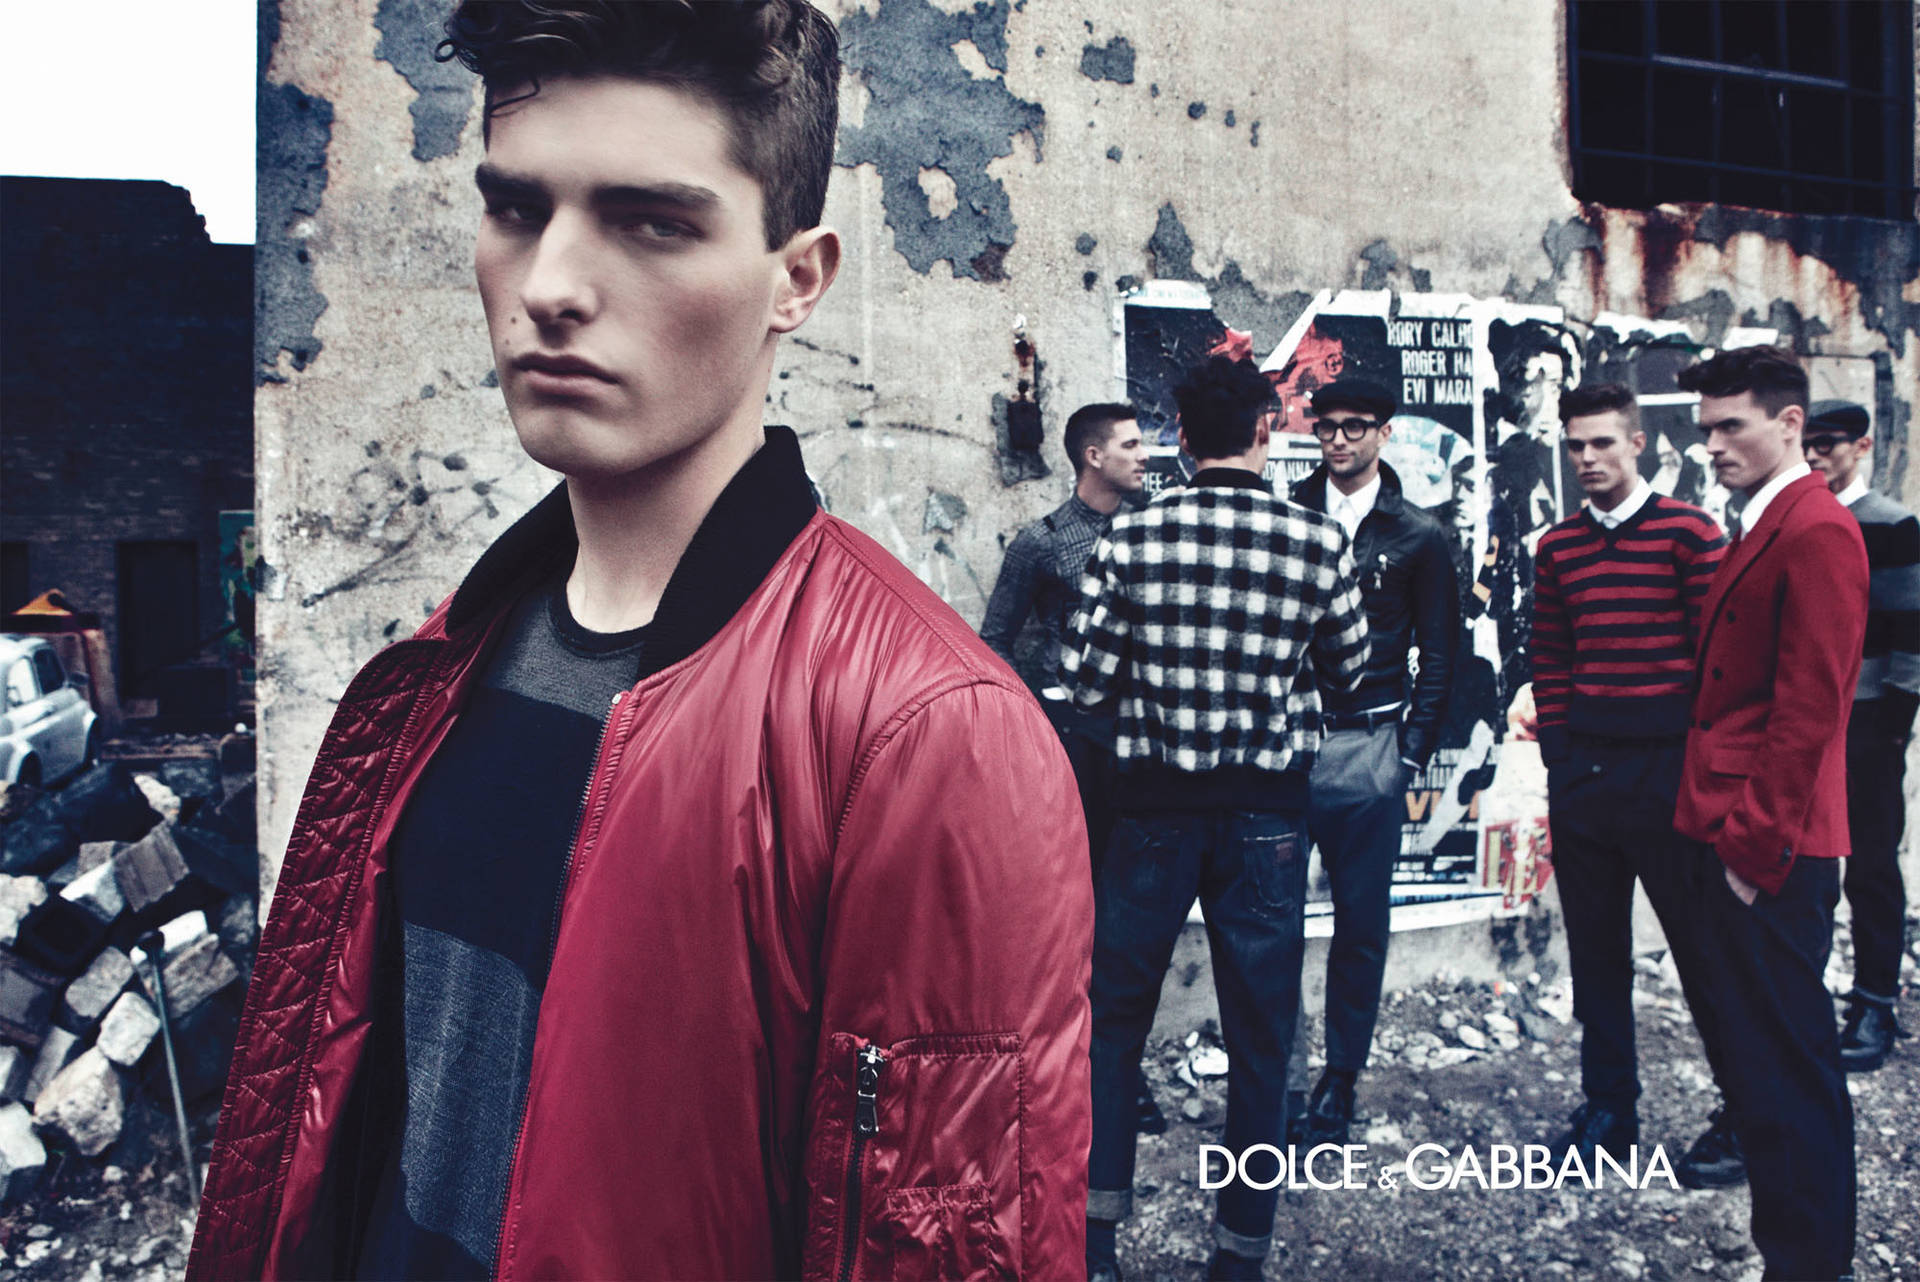 Stunning Models in Dolce and Gabbana's Signature Red and Black Attire Wallpaper